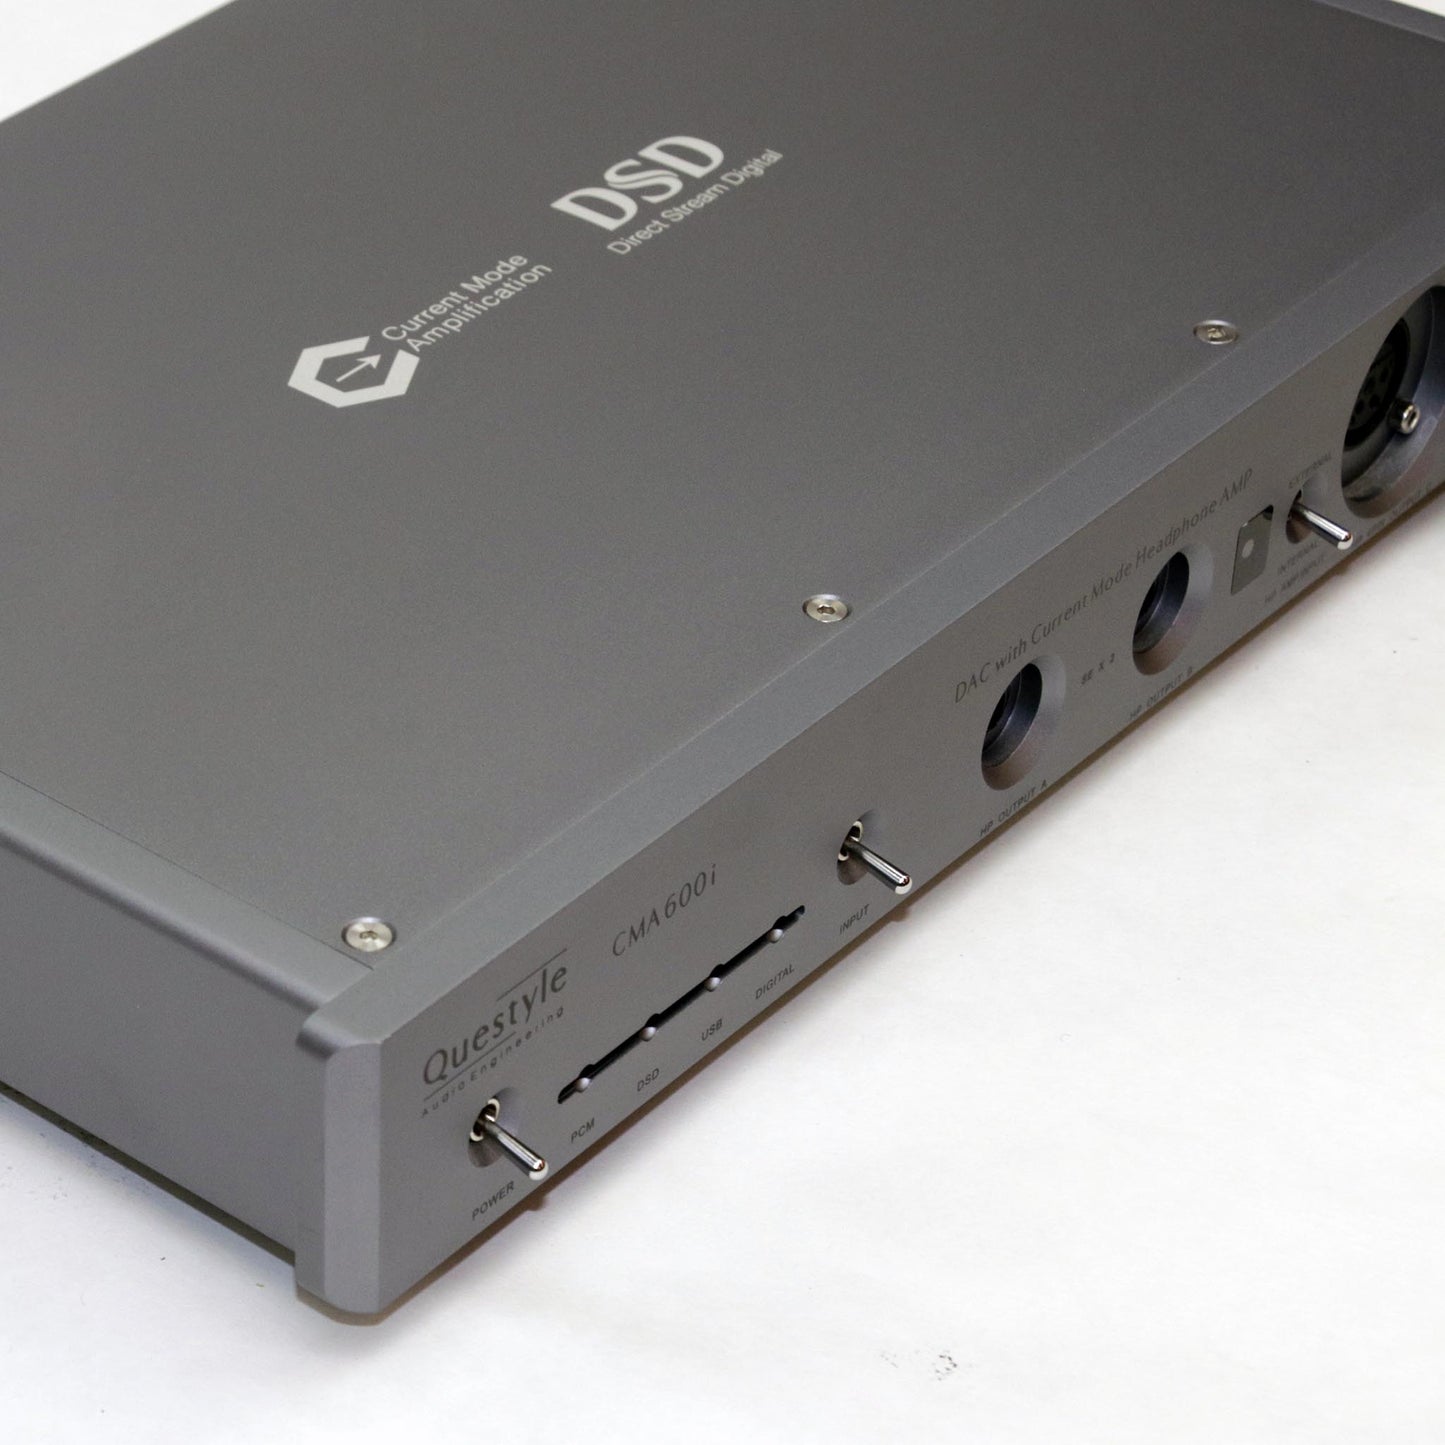 Questyle CMA600i Headphone Amplifier / DAC (USED)